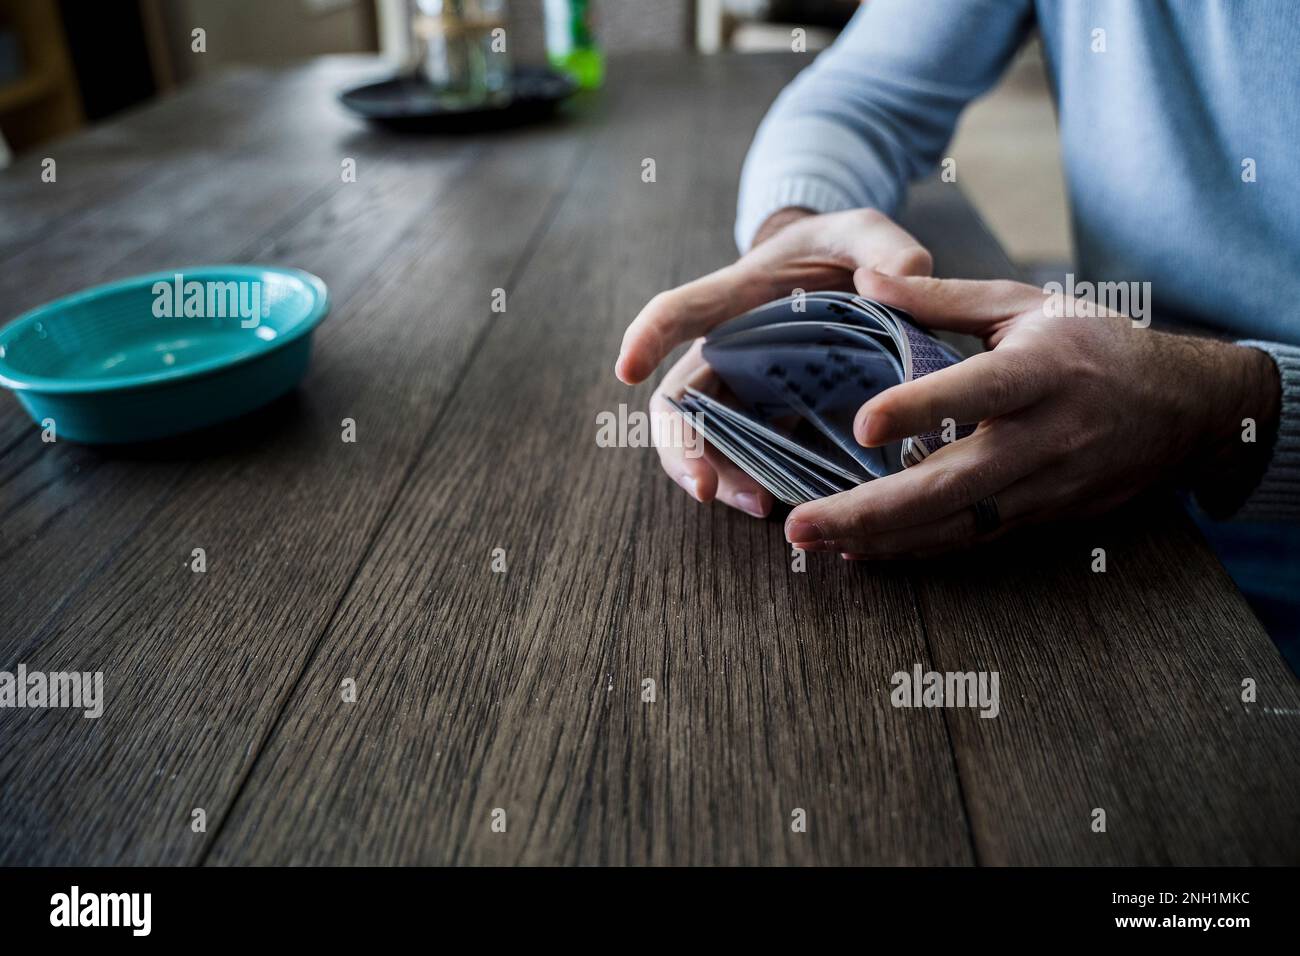 Caucasian Man Shuffling a Deck of Playing Cards at Dining Table Stock Photo